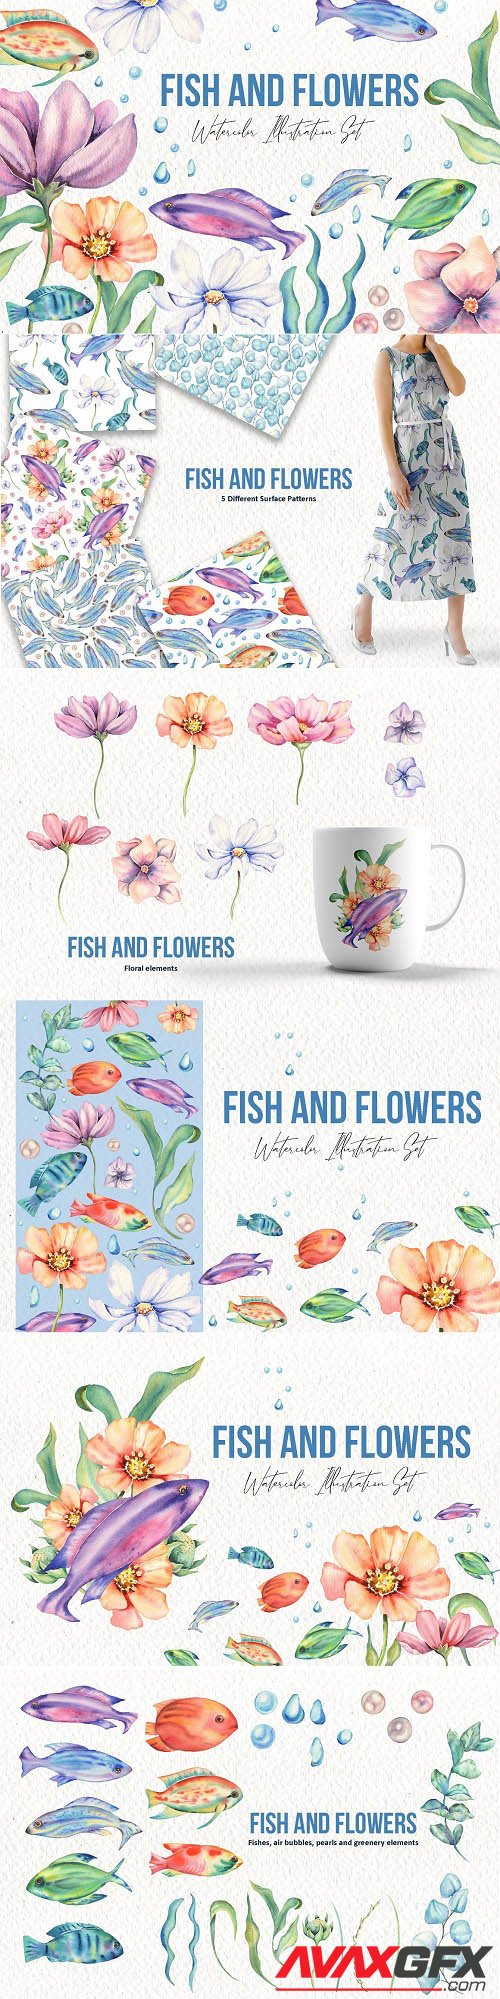 Fishes and Flowers Illustration Set - 6364609